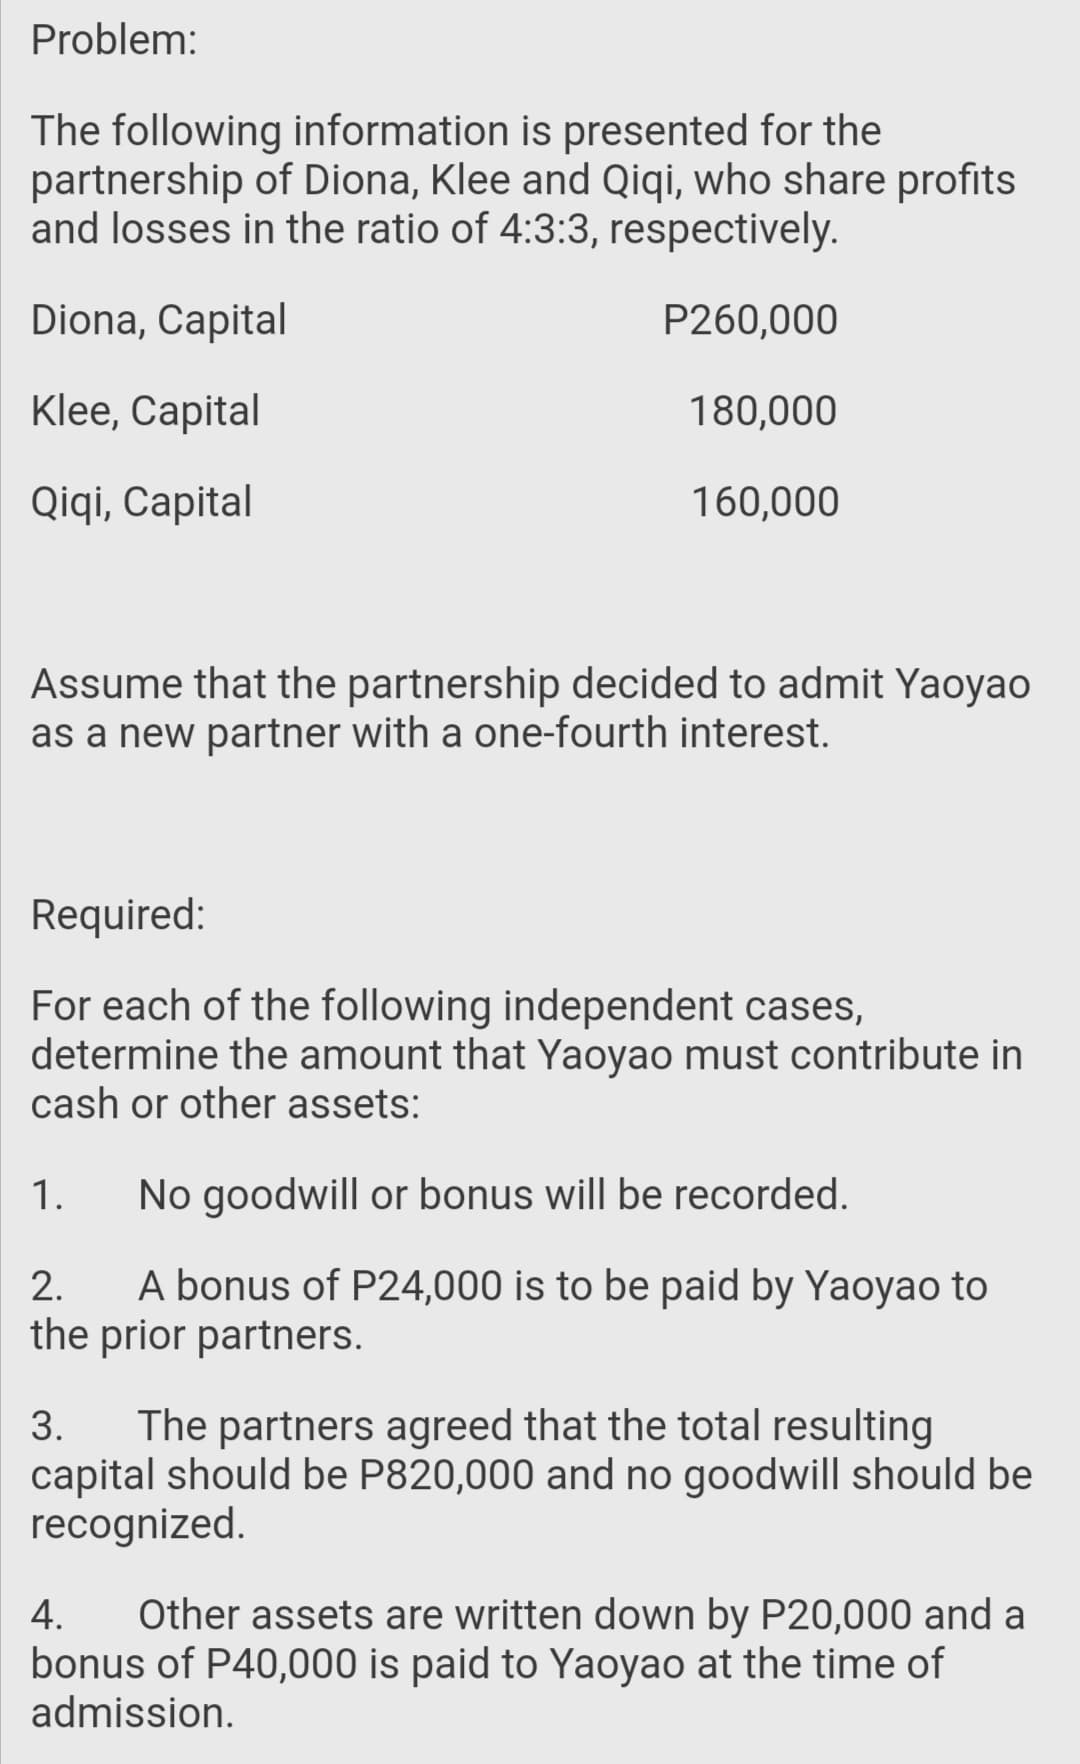 Problem:
The following information is presented for the
partnership of Diona, Klee and Qiqi, who share profits
and losses in the ratio of 4:3:3, respectively.
Diona, Capital
P260,000
Klee, Capital
180,000
Qiqi, Capital
160,000
Assume that the partnership decided to admit Yaoyao
as a new partner with a one-fourth interest.
Required:
For each of the following independent cases,
determine the amount that Yaoyao must contribute in
cash or other assets:
1.
No goodwill or bonus will be recorded.
A bonus of P24,000 is to be paid by Yaoyao to
the prior partners.
2.
The partners agreed that the total resulting
capital should be P820,000 and no goodwill should be
recognized.
3.
Other assets are written down by P20,000 and a
bonus of P40,000 is paid to Yaoyao at the time of
admission.
4.
